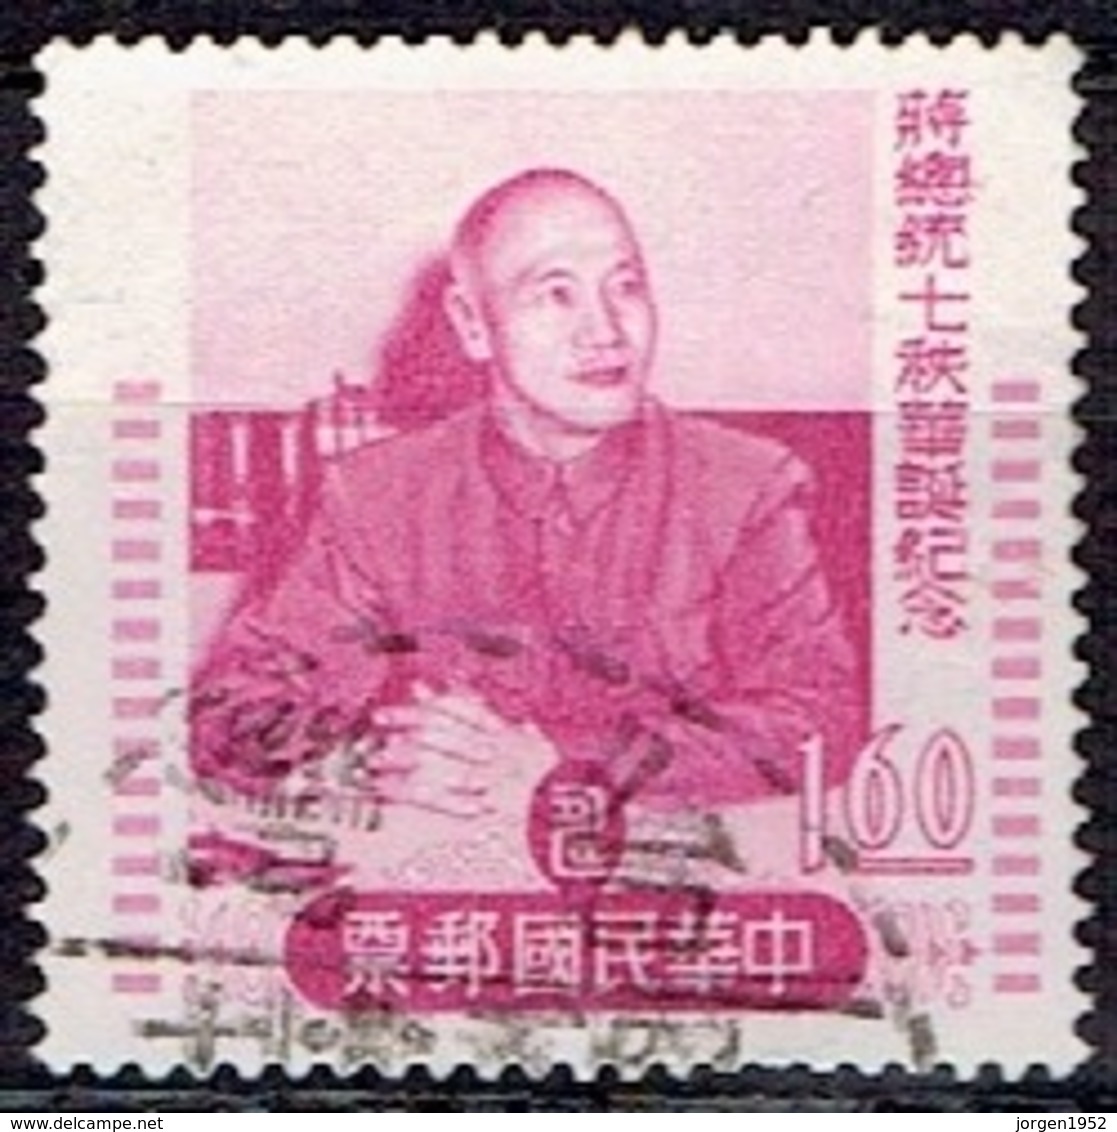 TAIWAN #   FROM 1956 STAMPWORLD 248 - Used Stamps